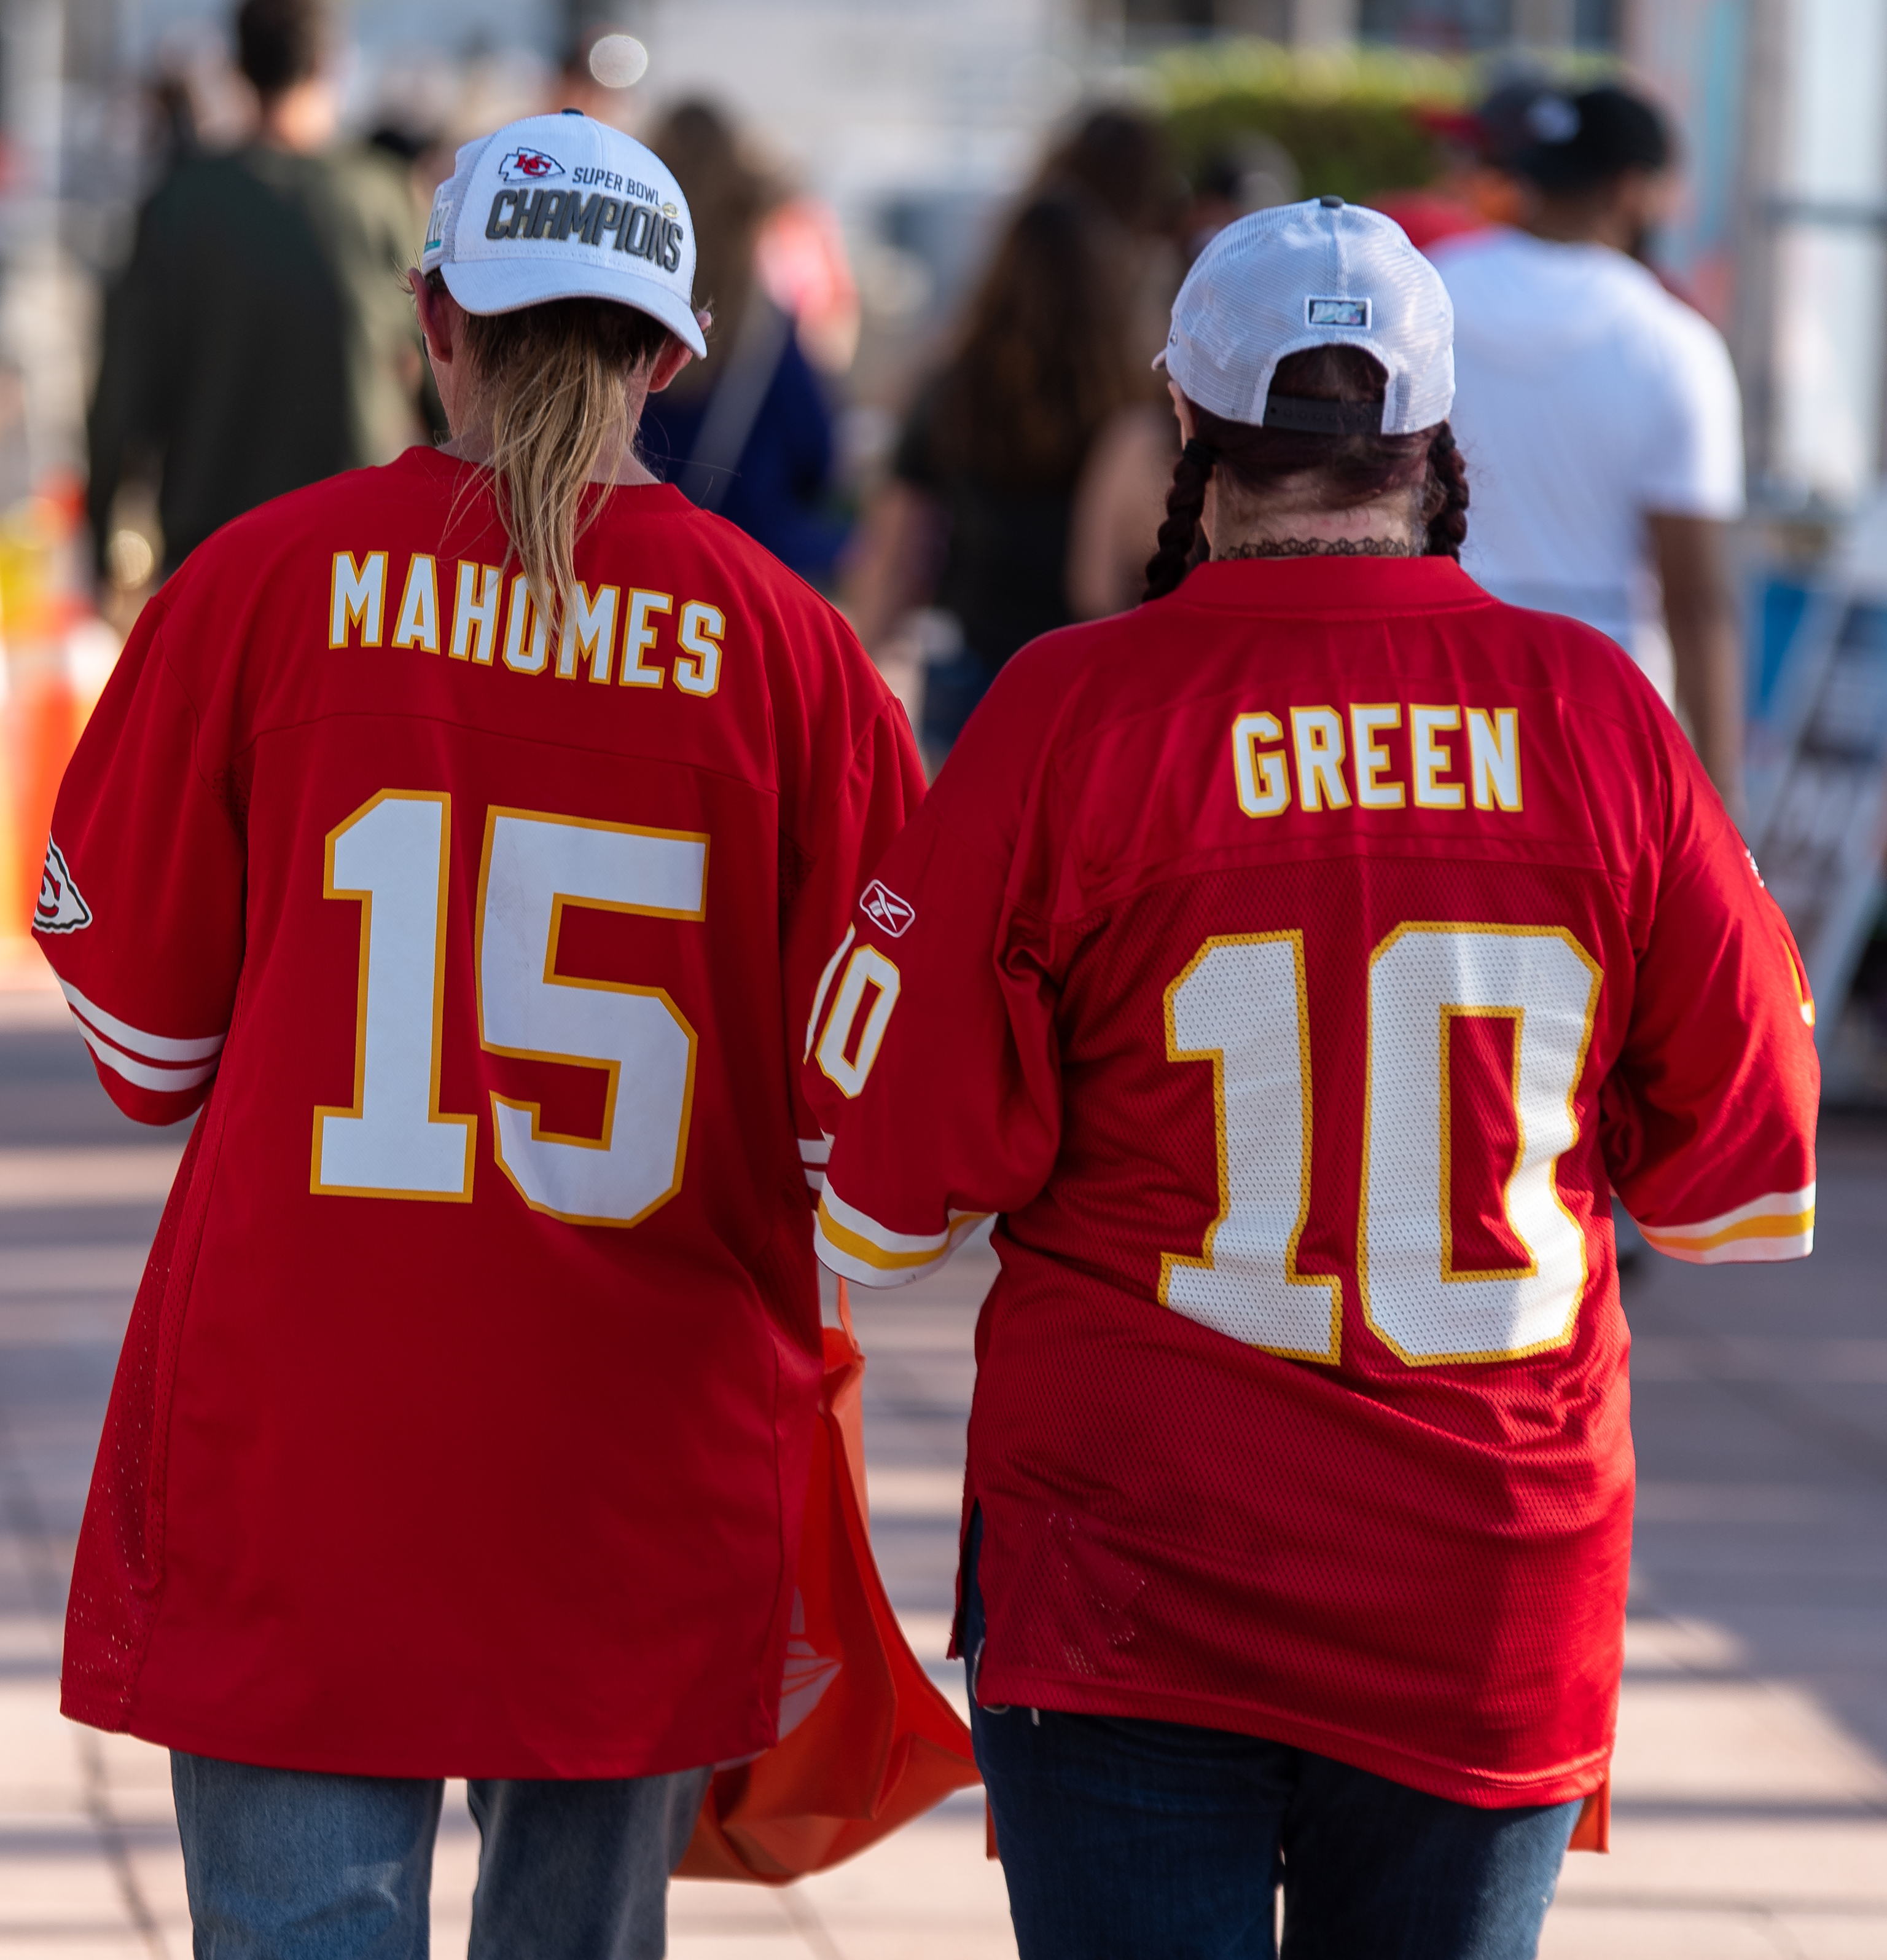 Two Chiefs supporters.